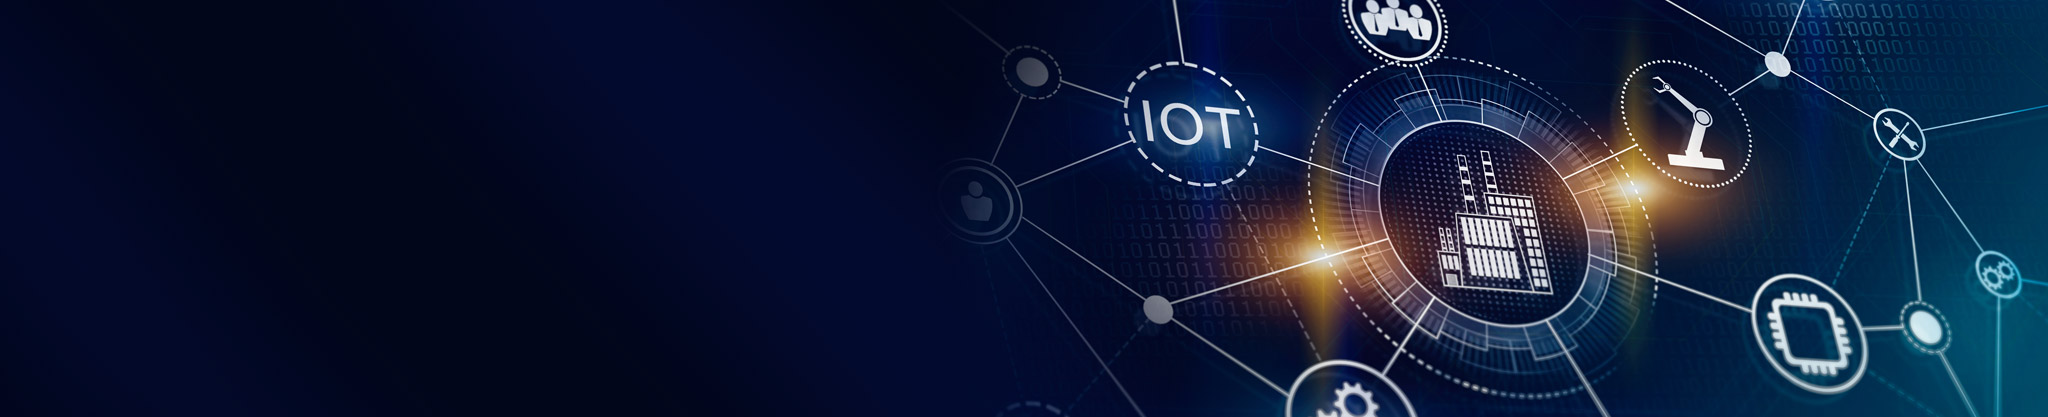 IoT certification manager (ICM)